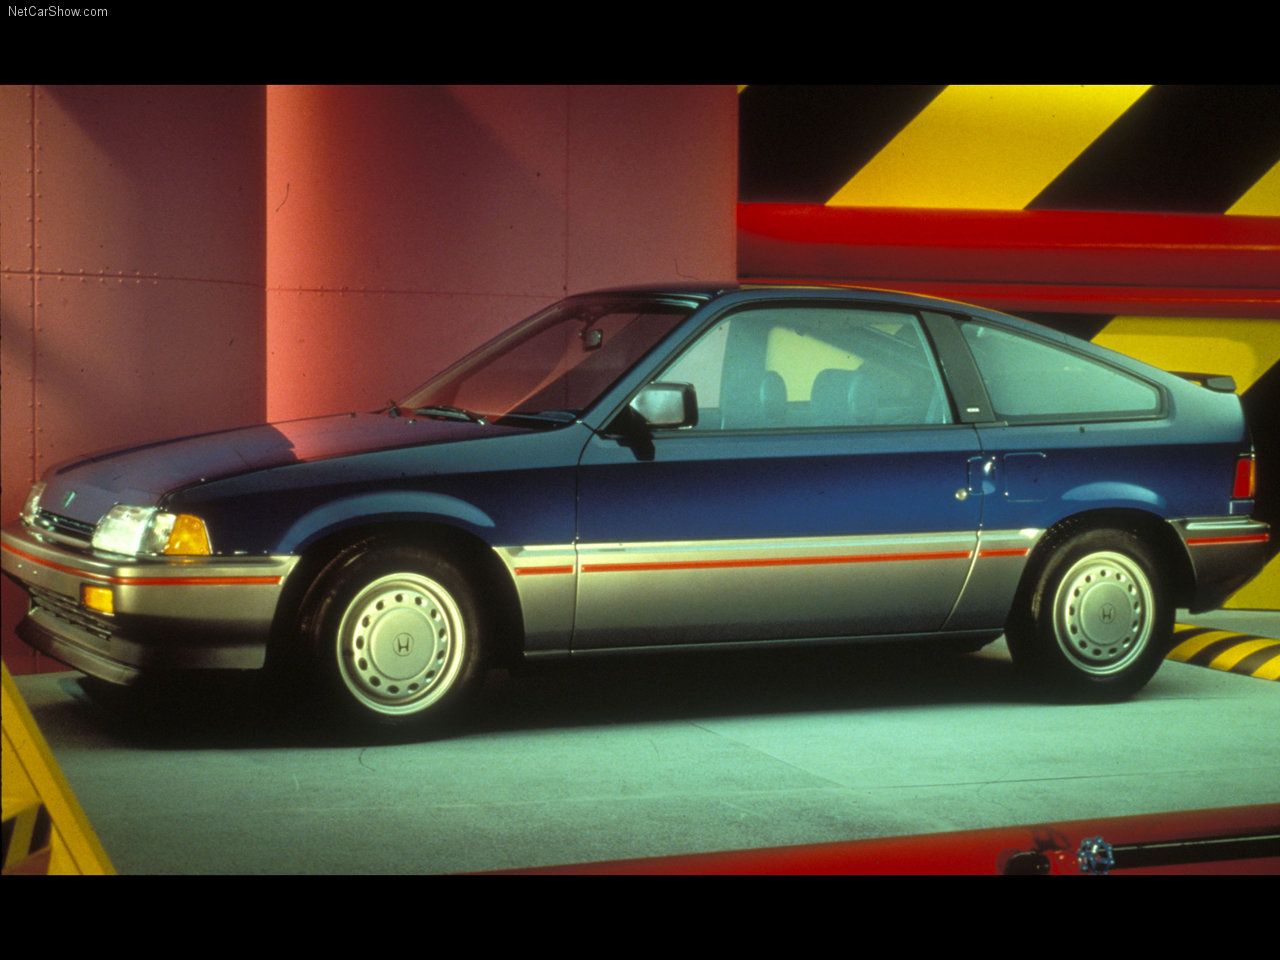 Honda-Civic_CRX-1986 left side view blue and gray